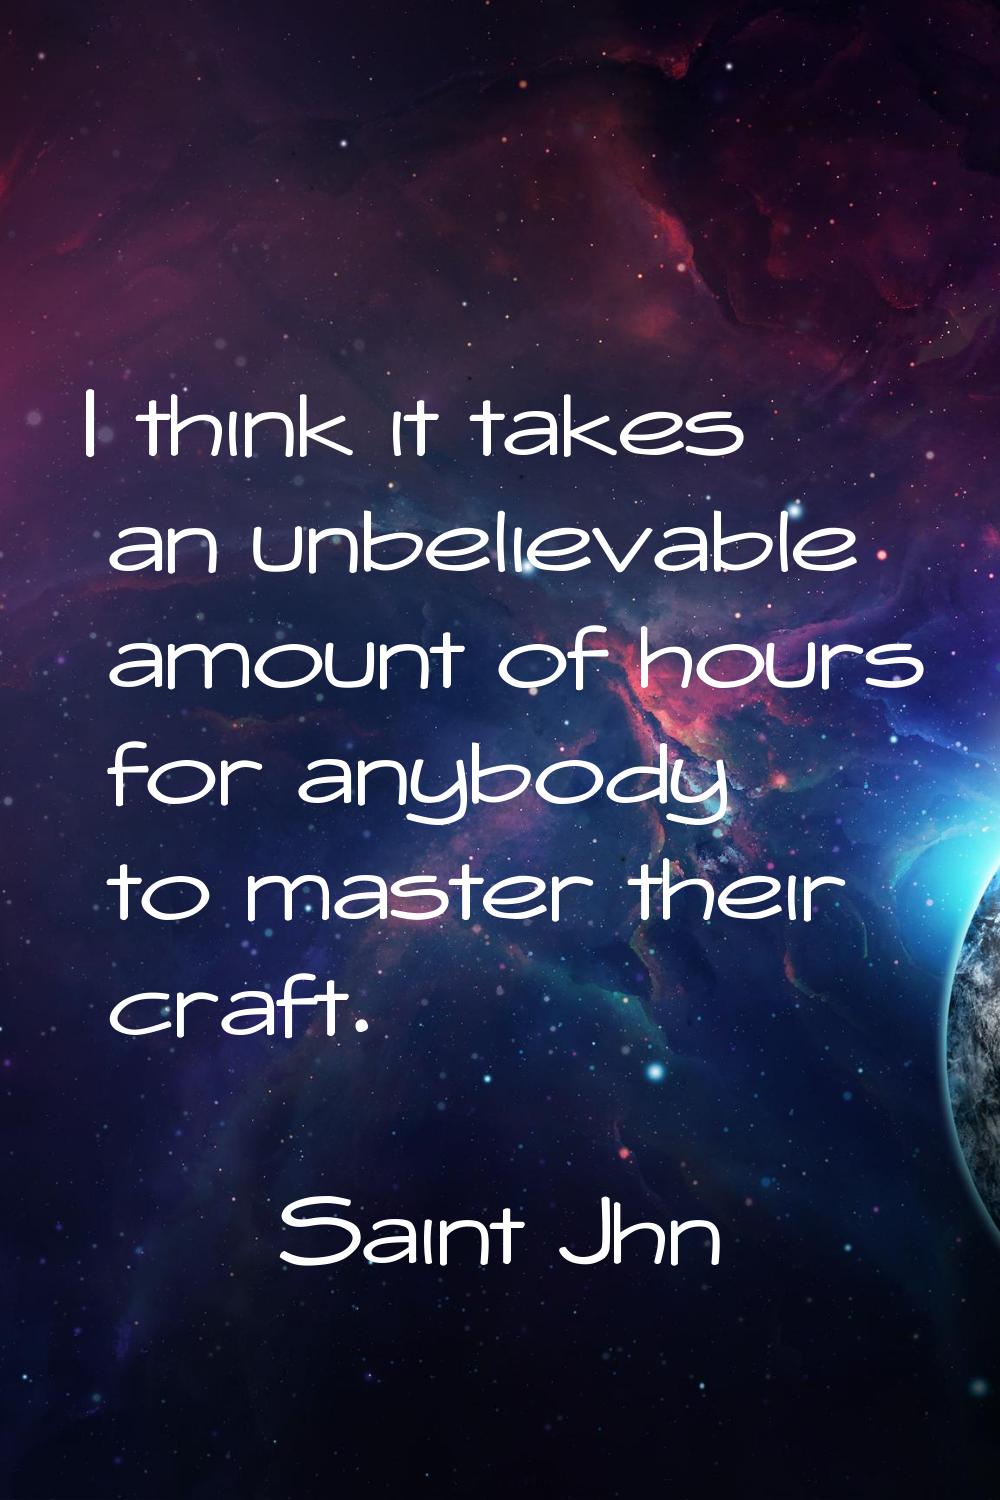 I think it takes an unbelievable amount of hours for anybody to master their craft.